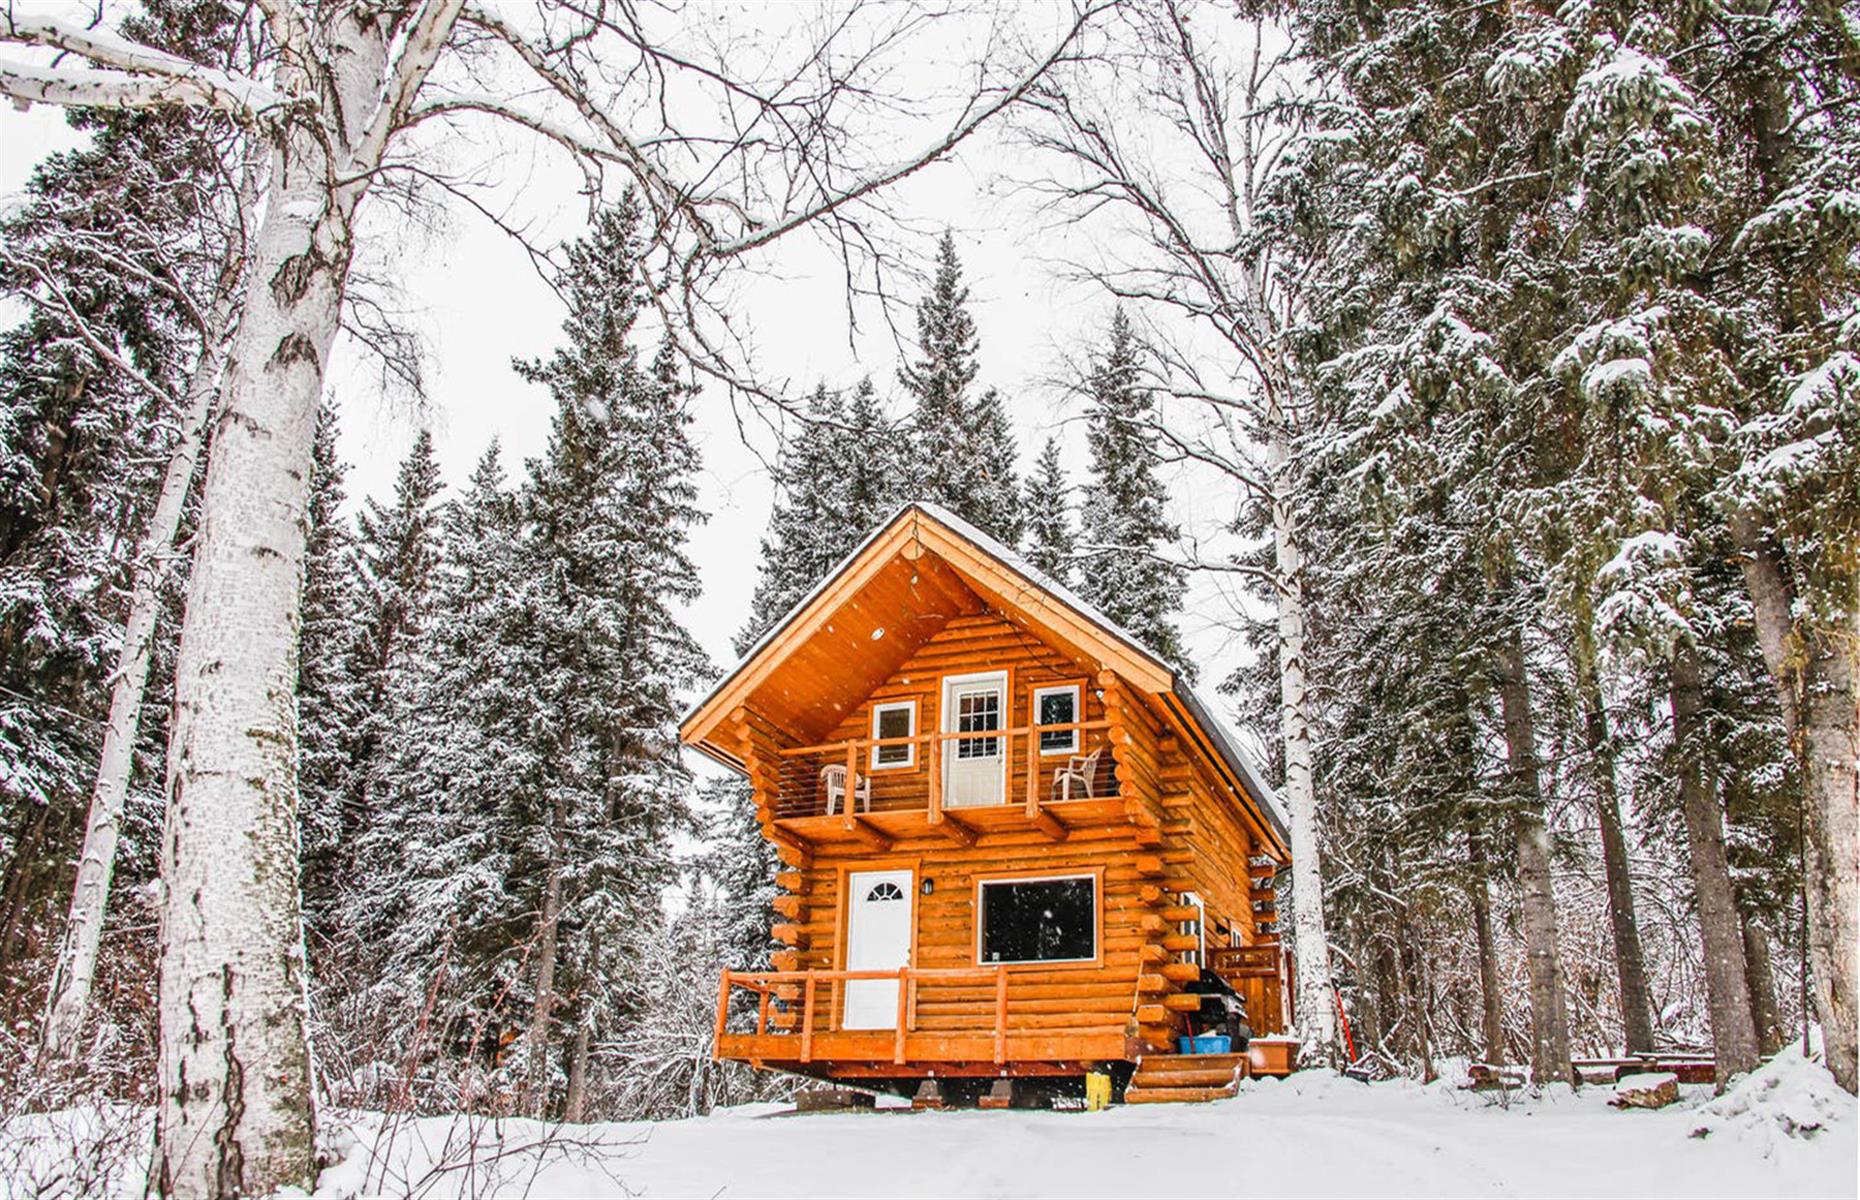 <p>Known as one of the top places in the world to see the Northern Lights, Fairbanks is a brilliant destination for a wintry getaway – and where better to enjoy it to the max than a rustic log cabin in the woods? <a href="https://www.airbnb.co.uk/rooms/6291833">This cozy Alaskan cabin</a> costs $86 a night and requires a minimum two-night stay. Located five miles (8km) from downtown Fairbanks, it's surrounded by walking trails and wildlife viewing points. Inside there's everything you need to enjoy a magical stay in this snowy landscape, too, from plenty of kitchen appliances to a large bedroom on the top floor. </p>